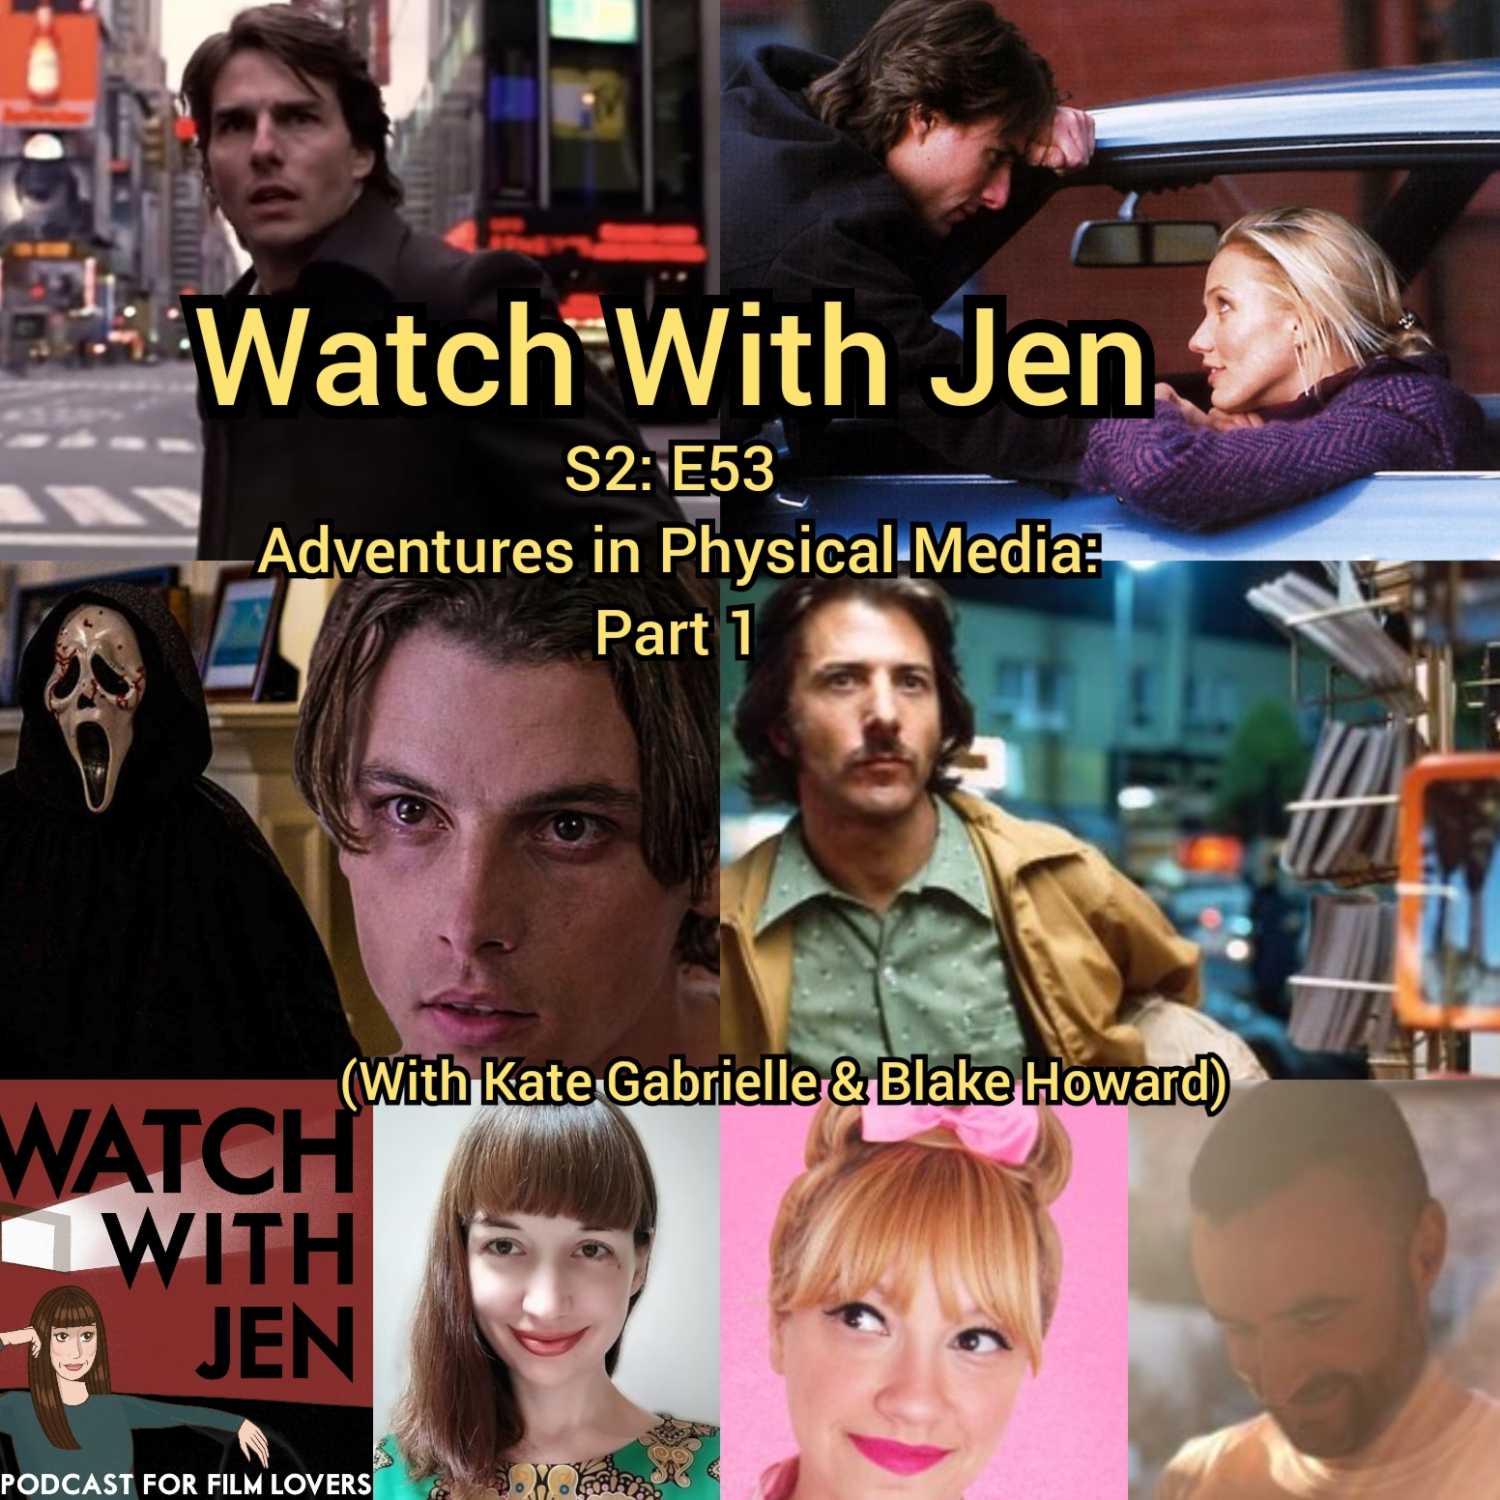 Watch With Jen - S2: E53 - Adventures in Physical Media: Part 1 (With Kate Gabrielle & Blake Howard)